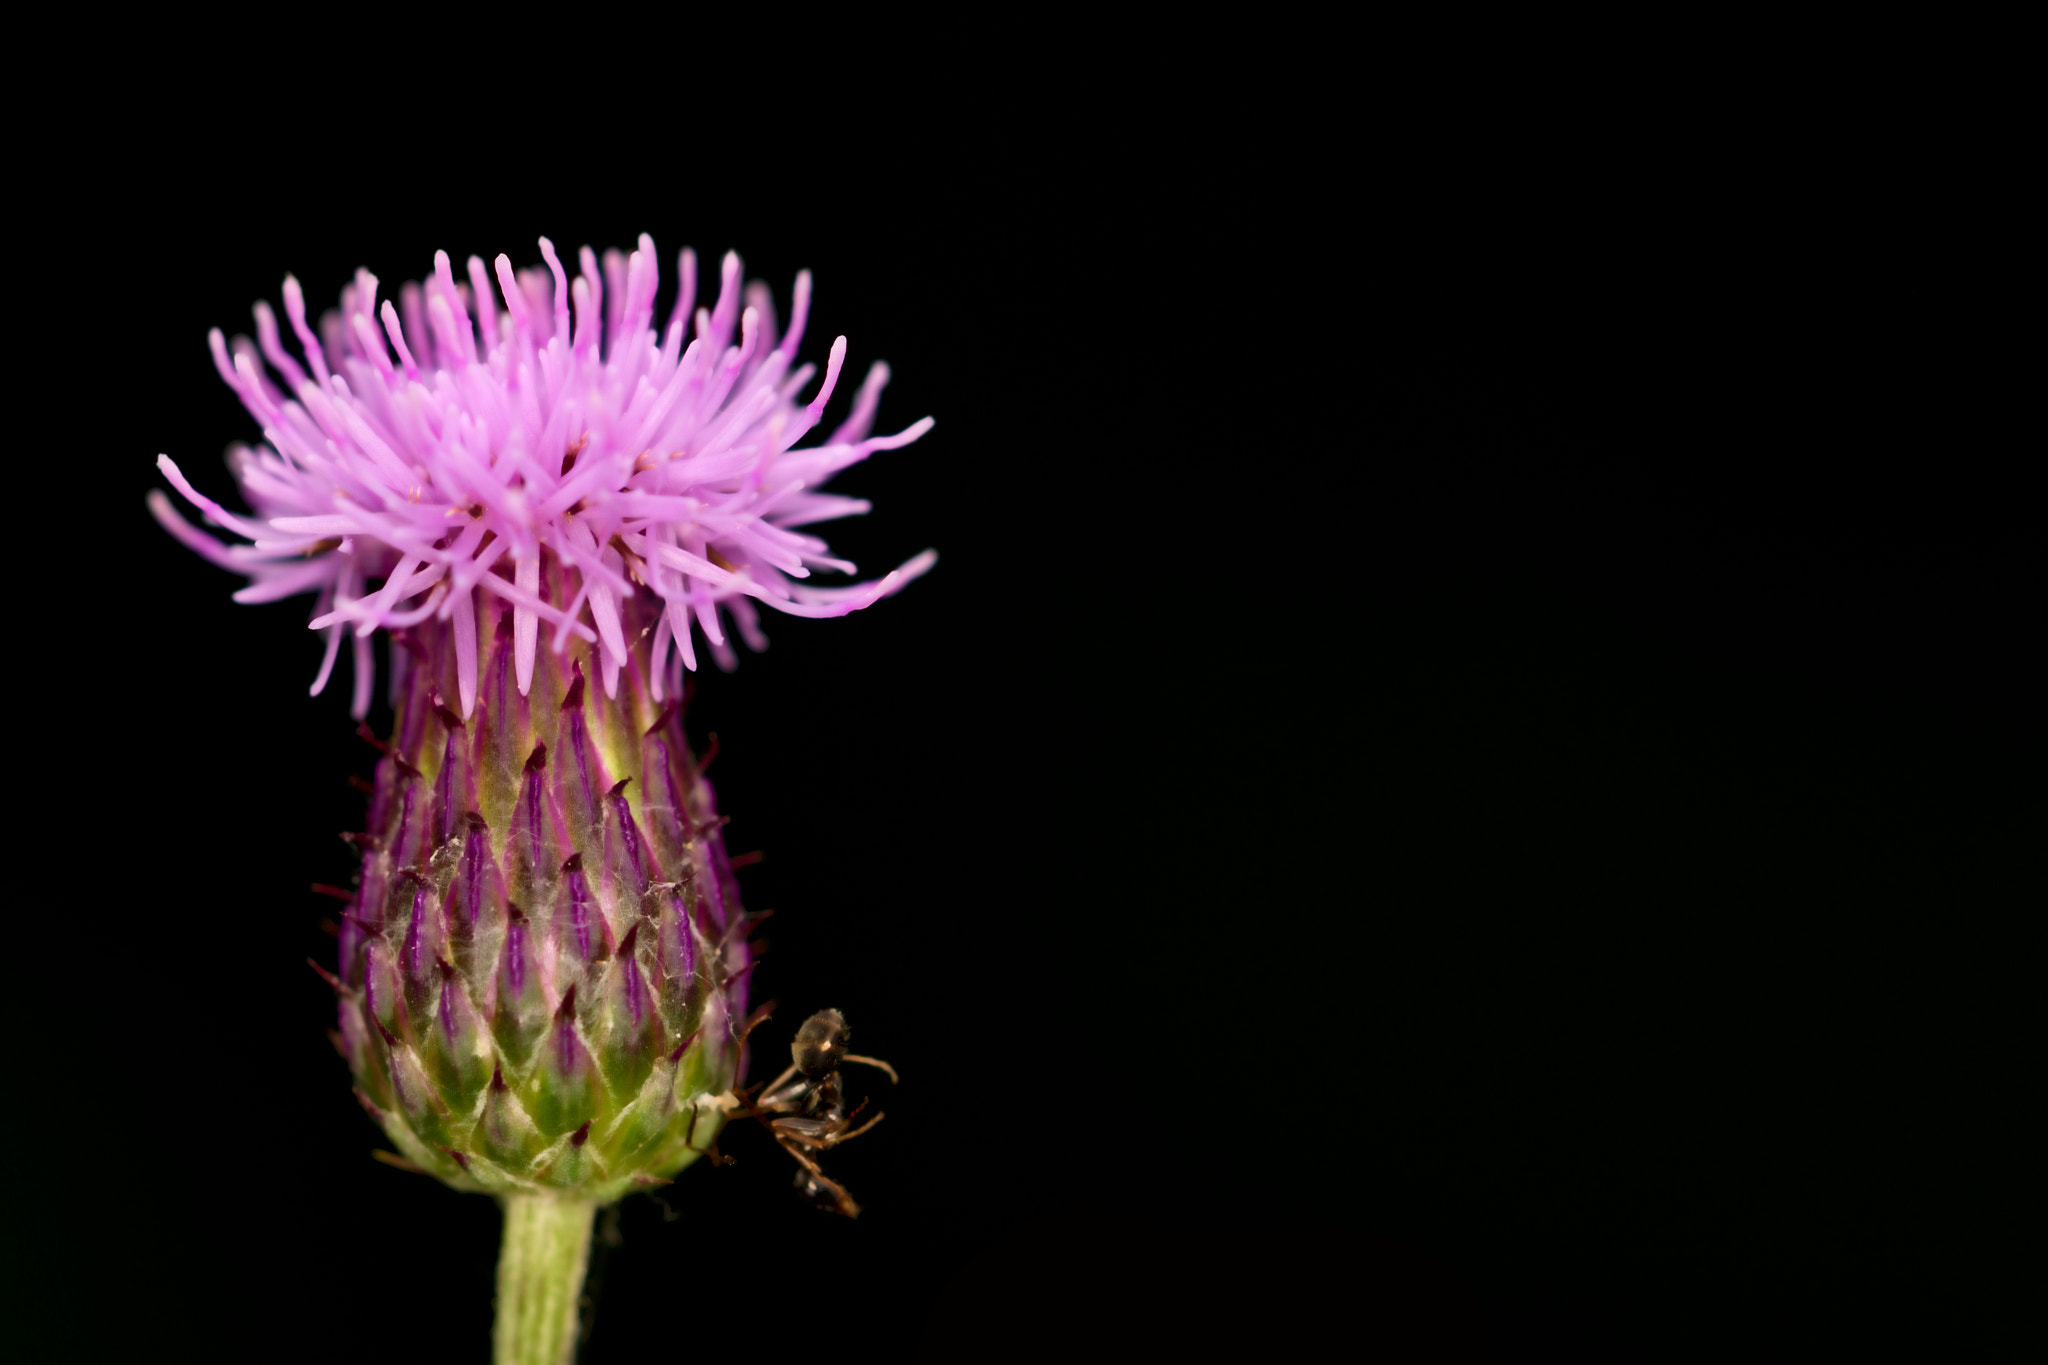 Tamron SP 90mm F2.8 Di VC USD 1:1 Macro (F004) sample photo. Pink flower with a black background and the ant: d photography